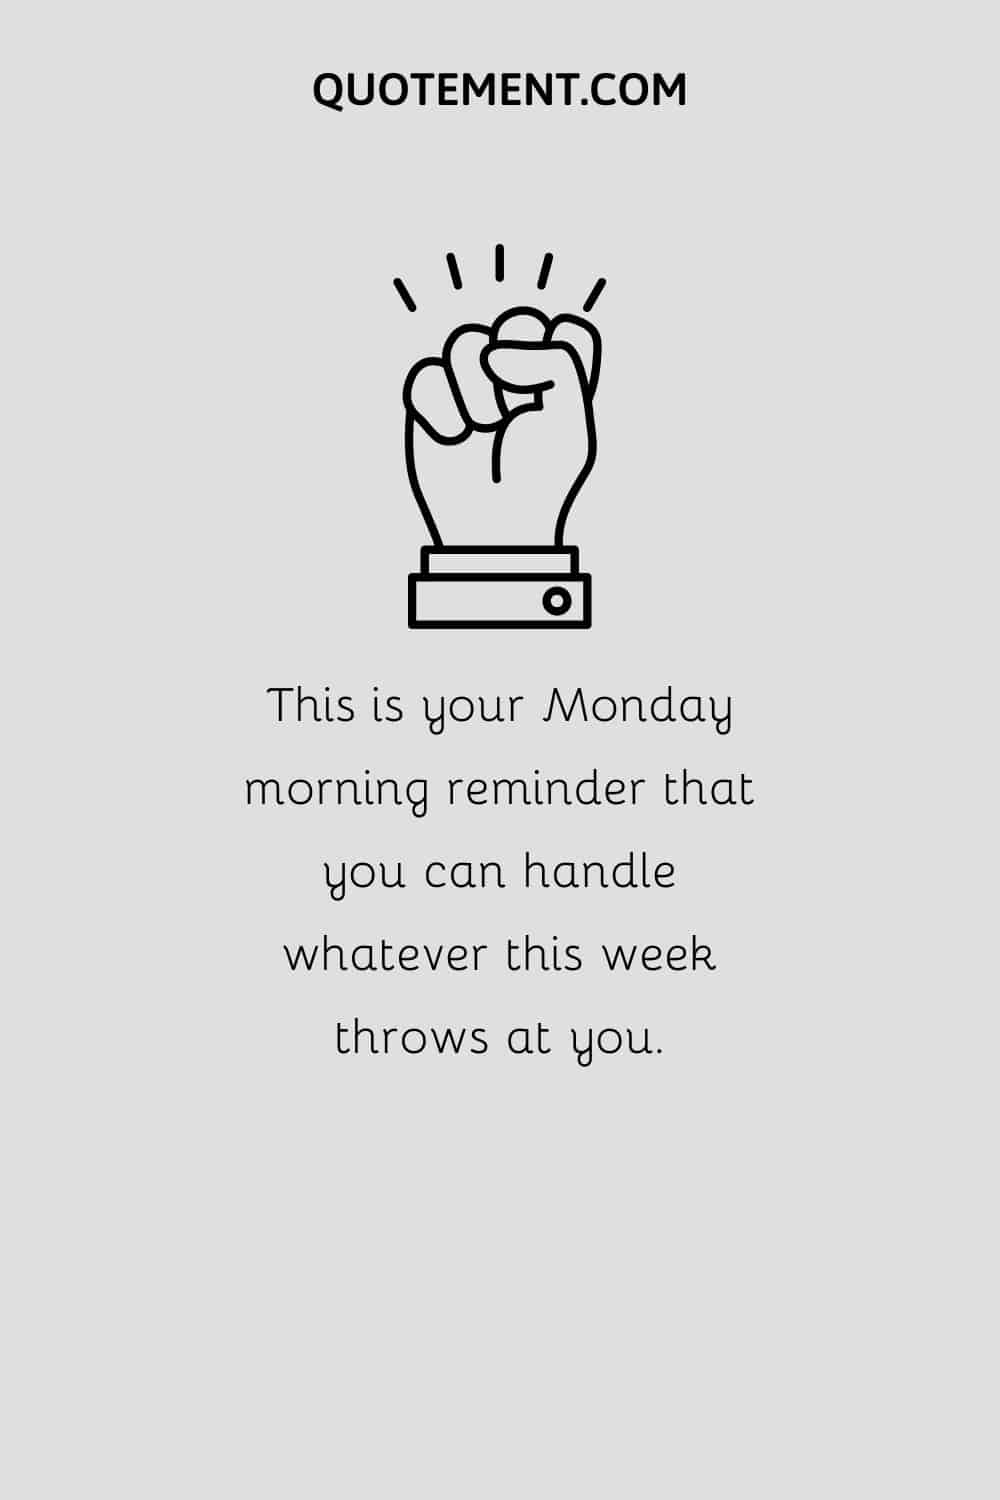 clenched fist illustration representing Monday morning inspirational quote